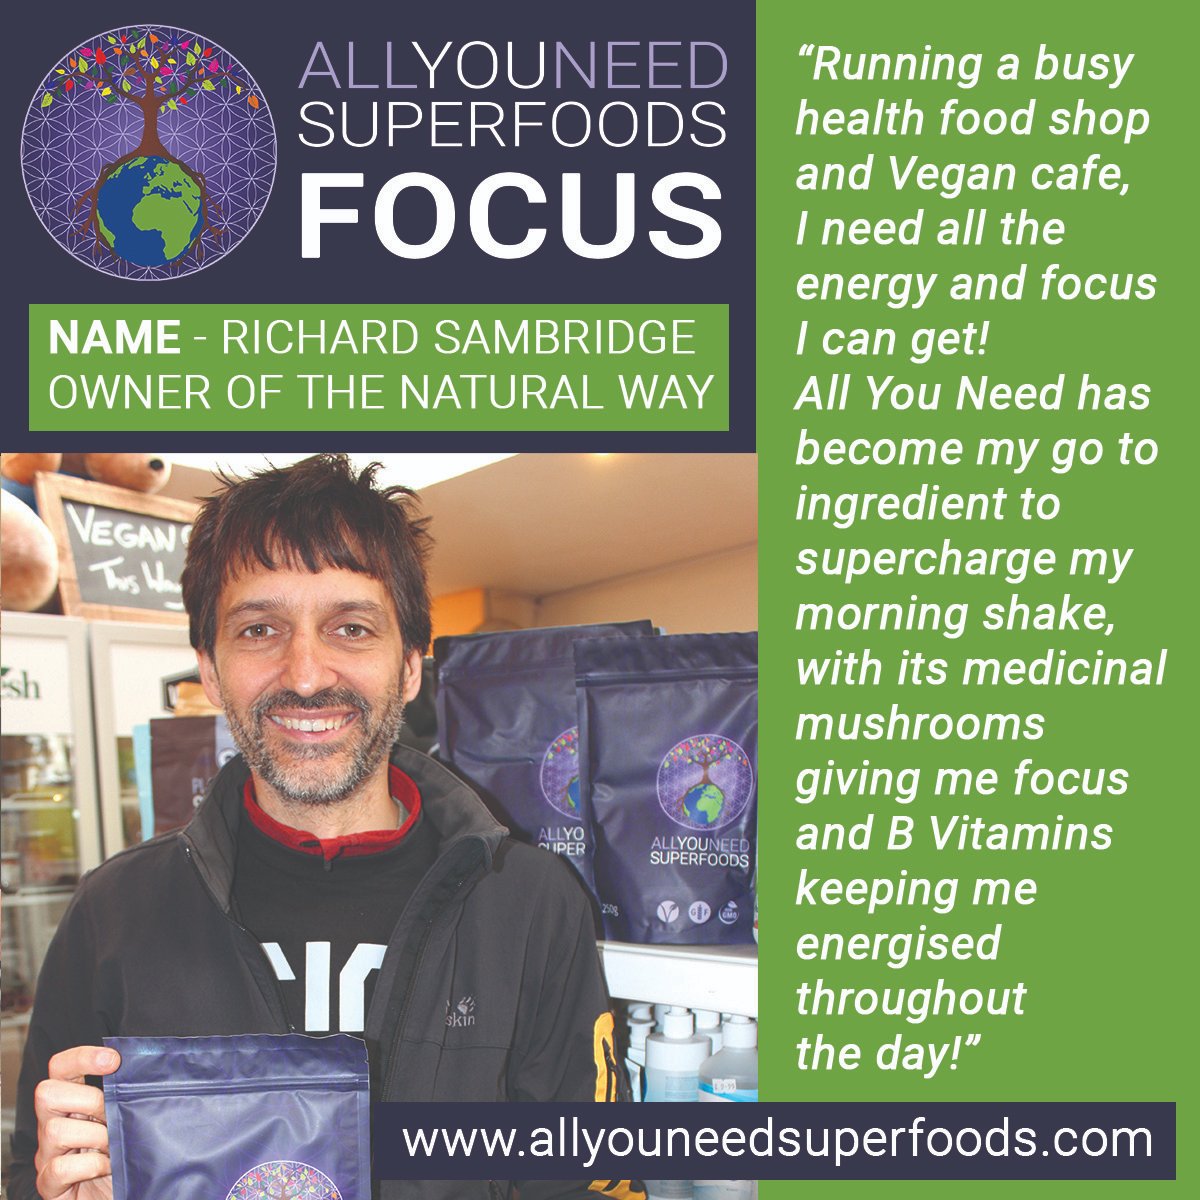 Our friends @thenaturalway, the best health food shop in Essex, serve All You Need in their smoothies and in the shop.  Owner Richard Sambridge tells us how all you need helps him focus for his busy days!  thenaturalway.co.uk